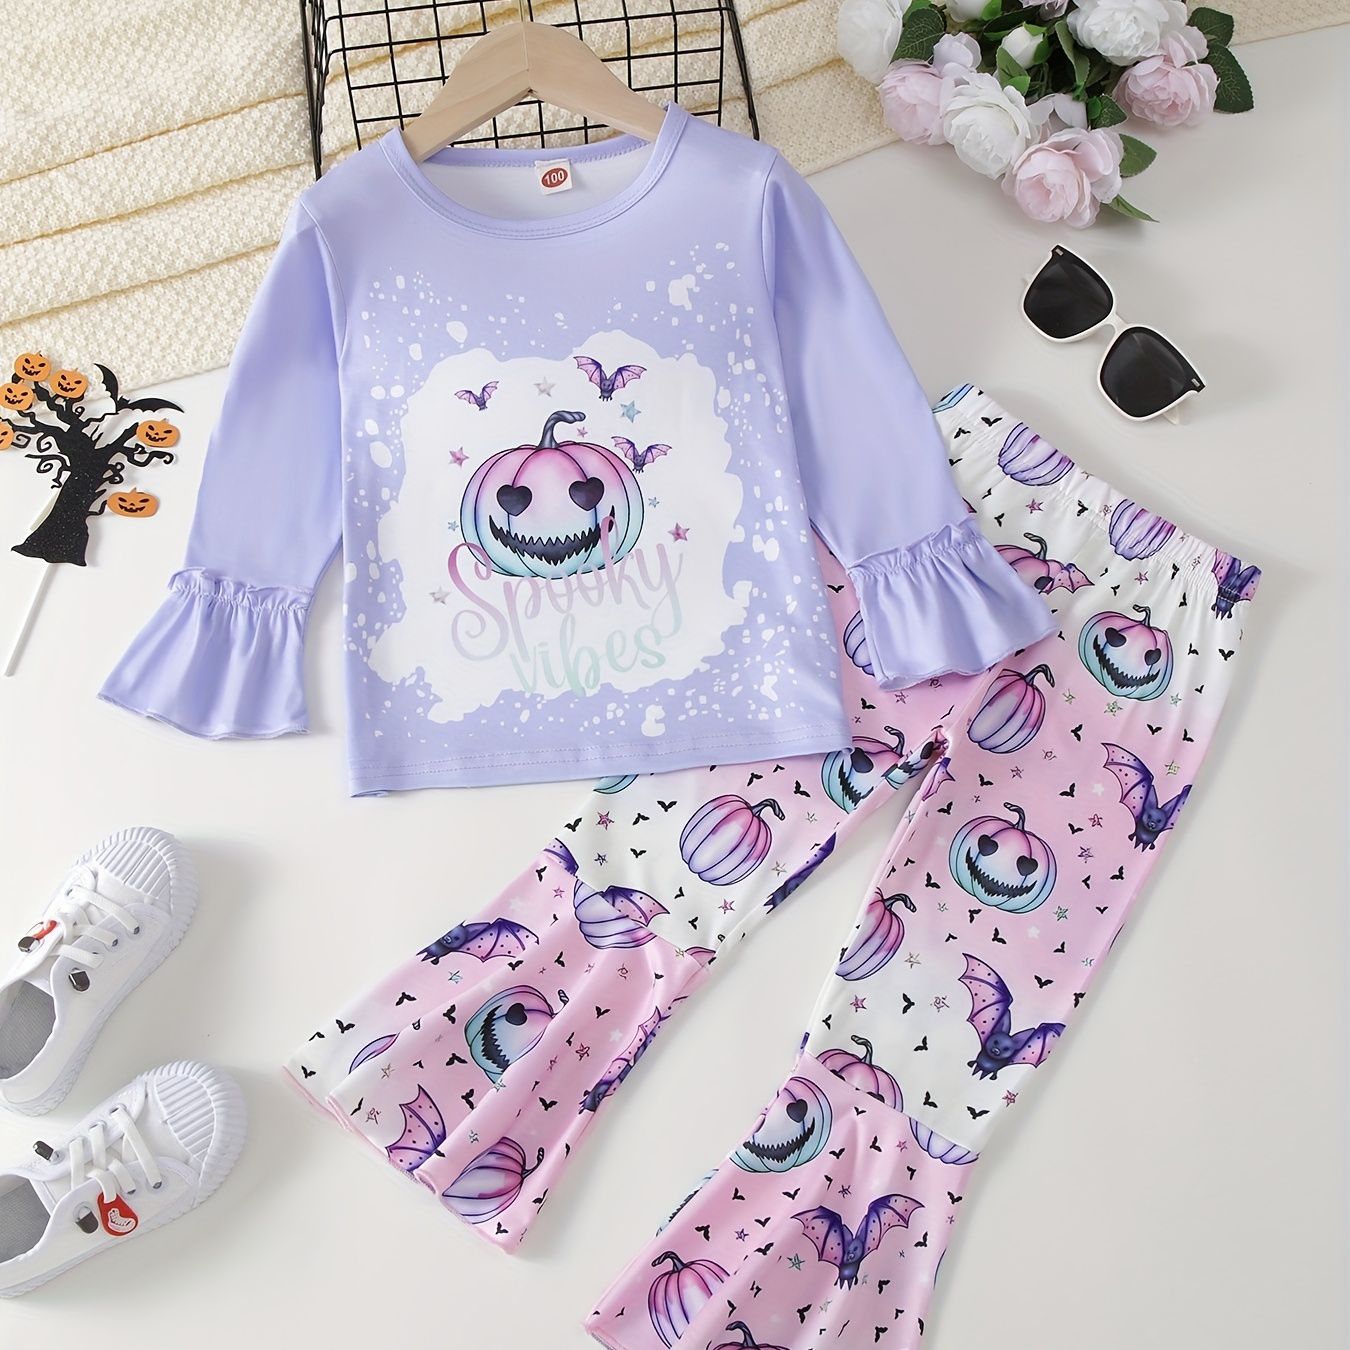 

Girl's Halloween Style Outfit 2pcs, Trumpet Sleeve Top & Pumpkin Allover Print Flared Pants Set, Spooky Vibes Print Kid's Clothes For Spring Fall